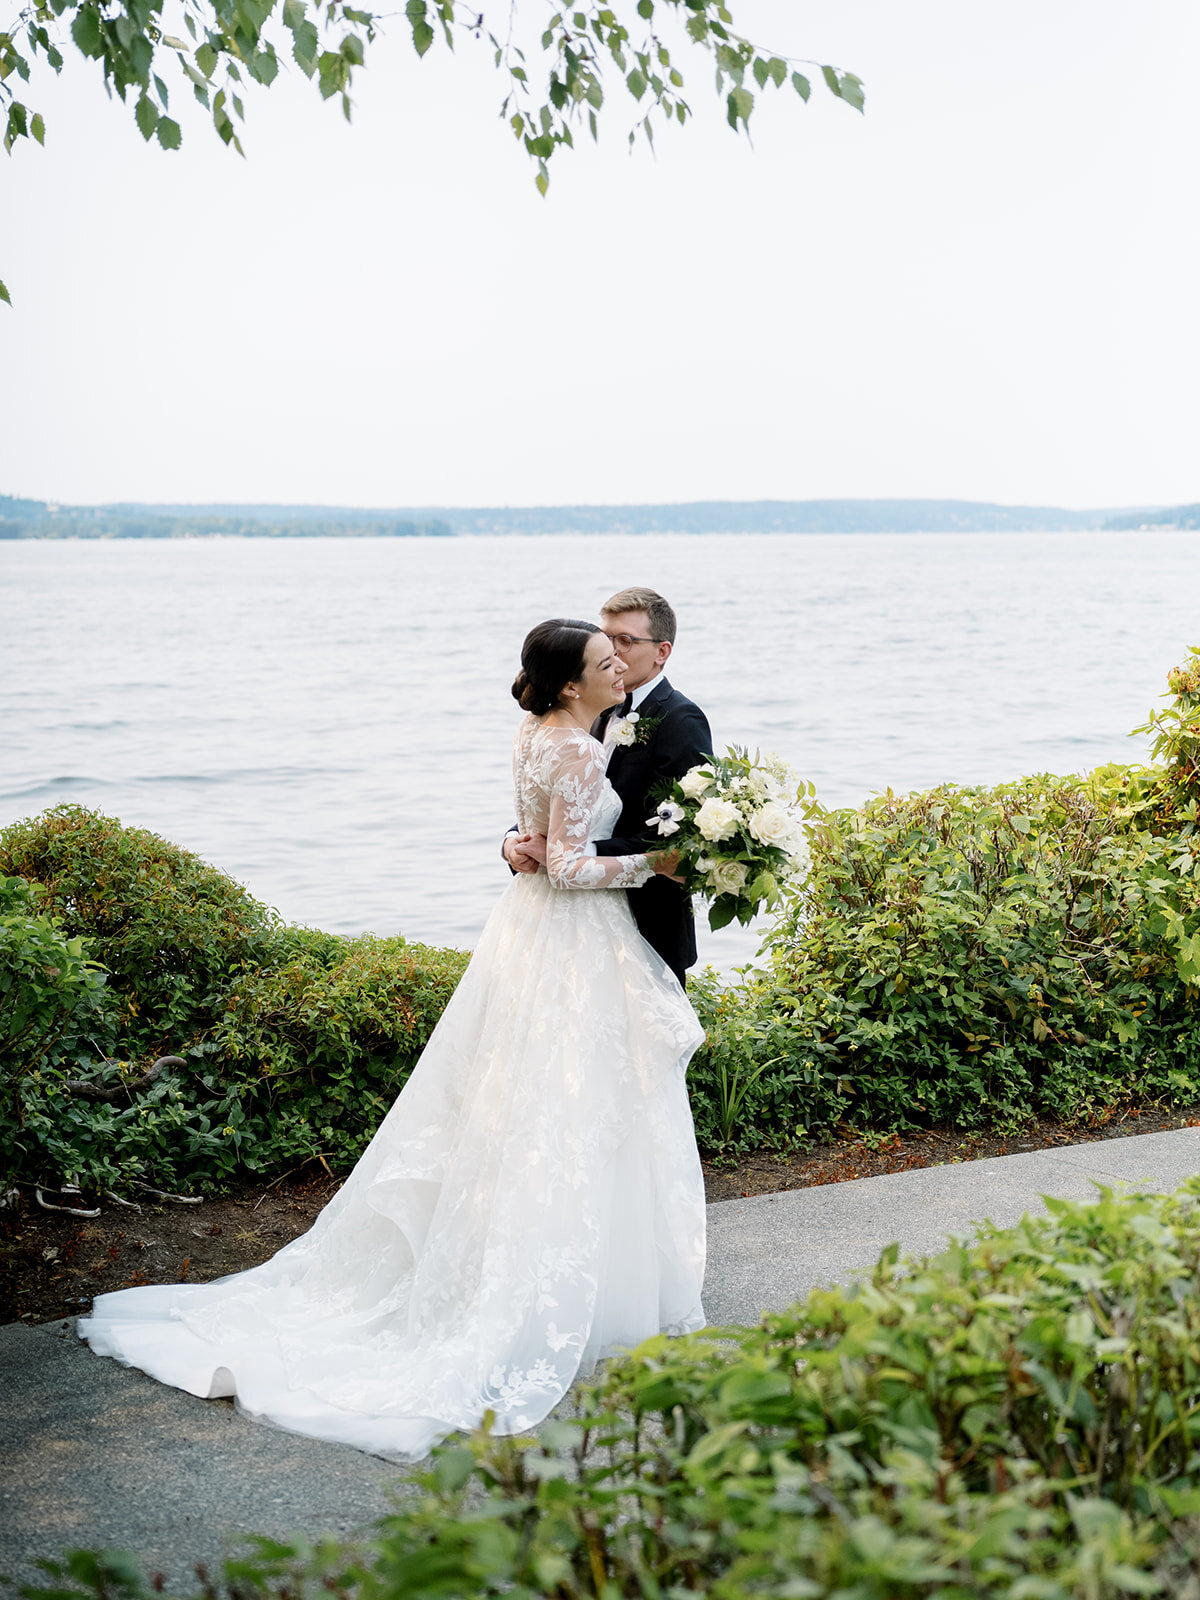 Woodmark-hotel-first-look-wedding-bride-and-groom-pictures-anna-peters-photography-pacific-engagements-wedding-planning-seattle